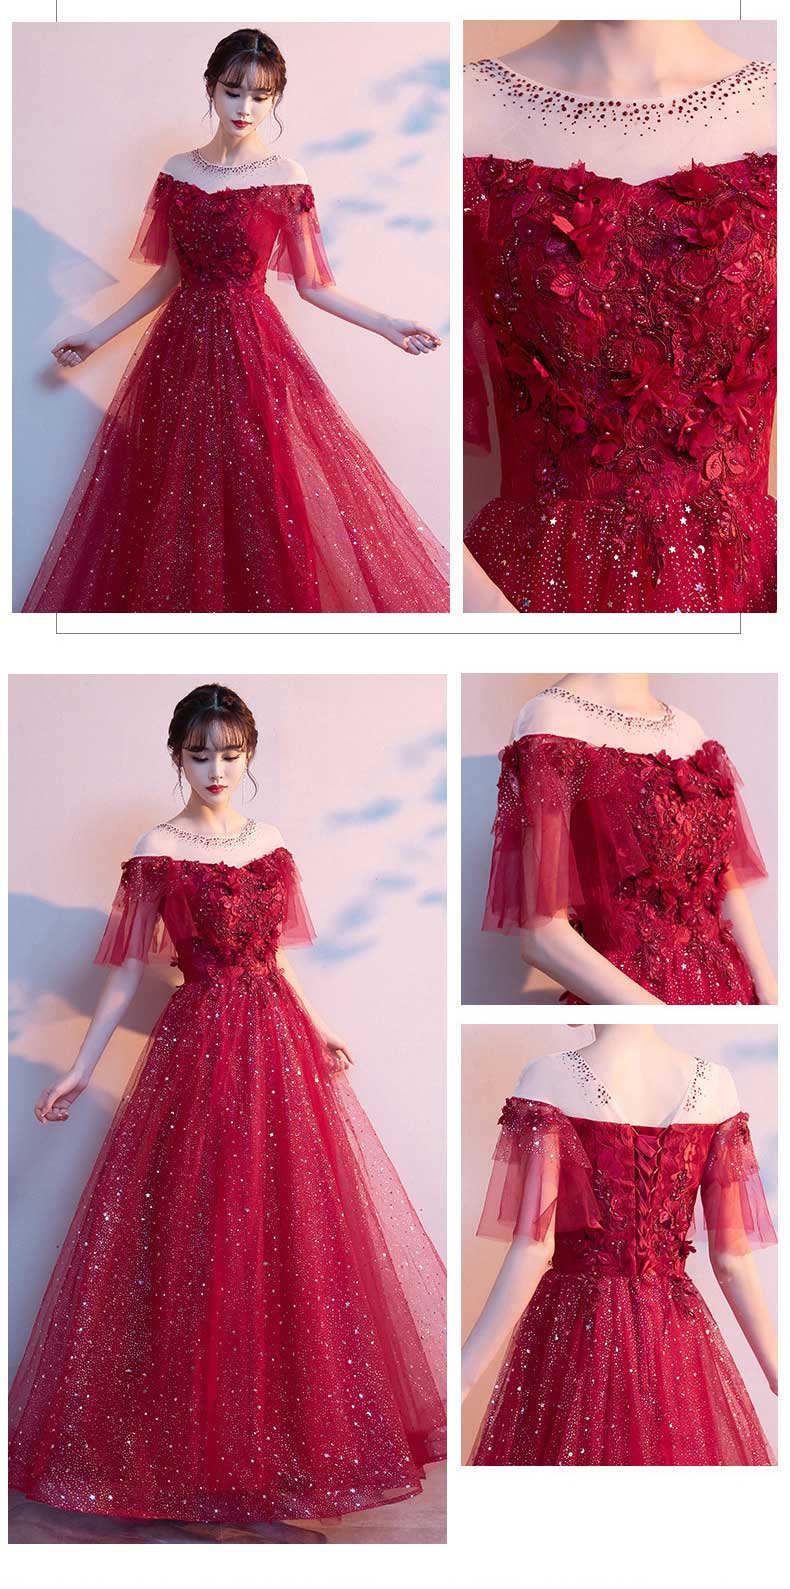 Sweet-Off-Shoulder-Chiffon-Wine-Red-Cocktail-Prom-Long-Dress09